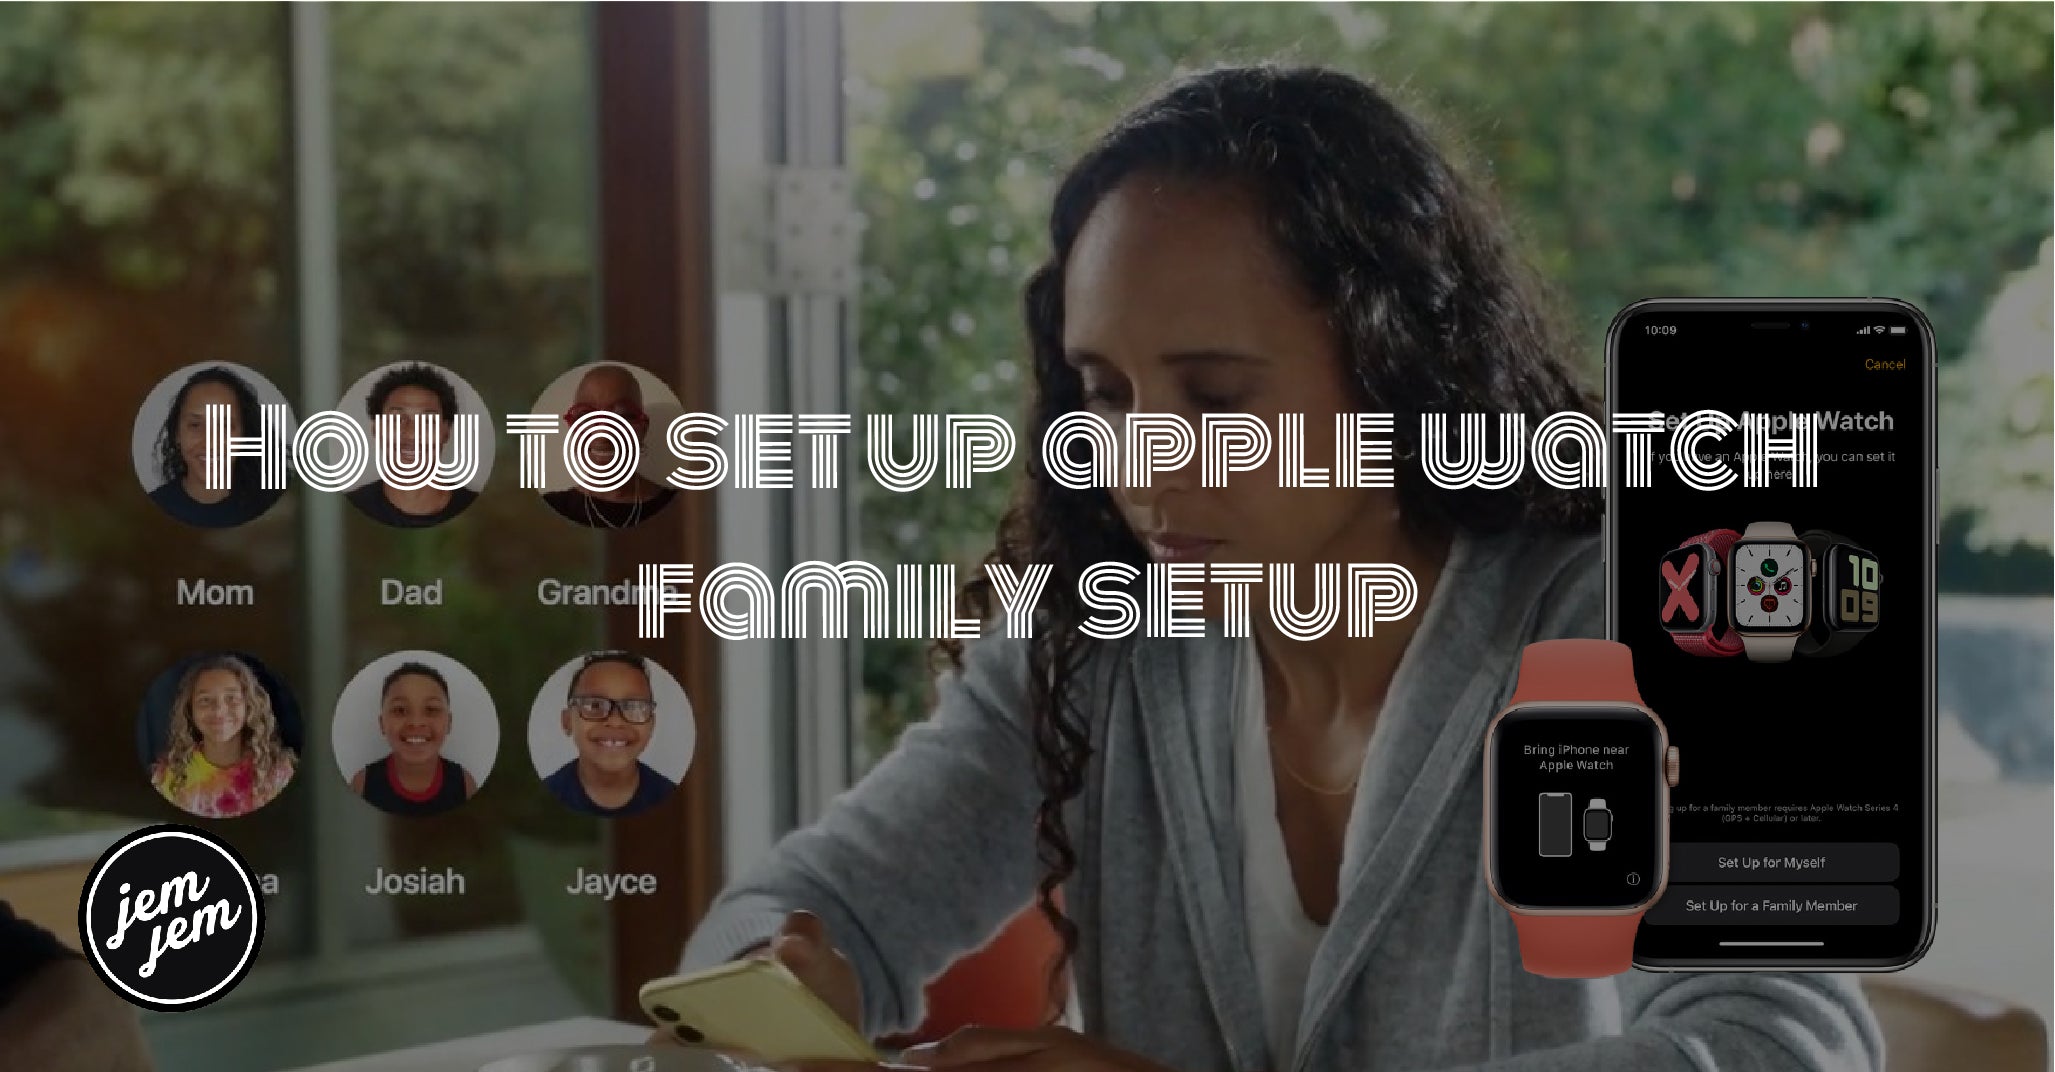 How to set up apple watch family setup